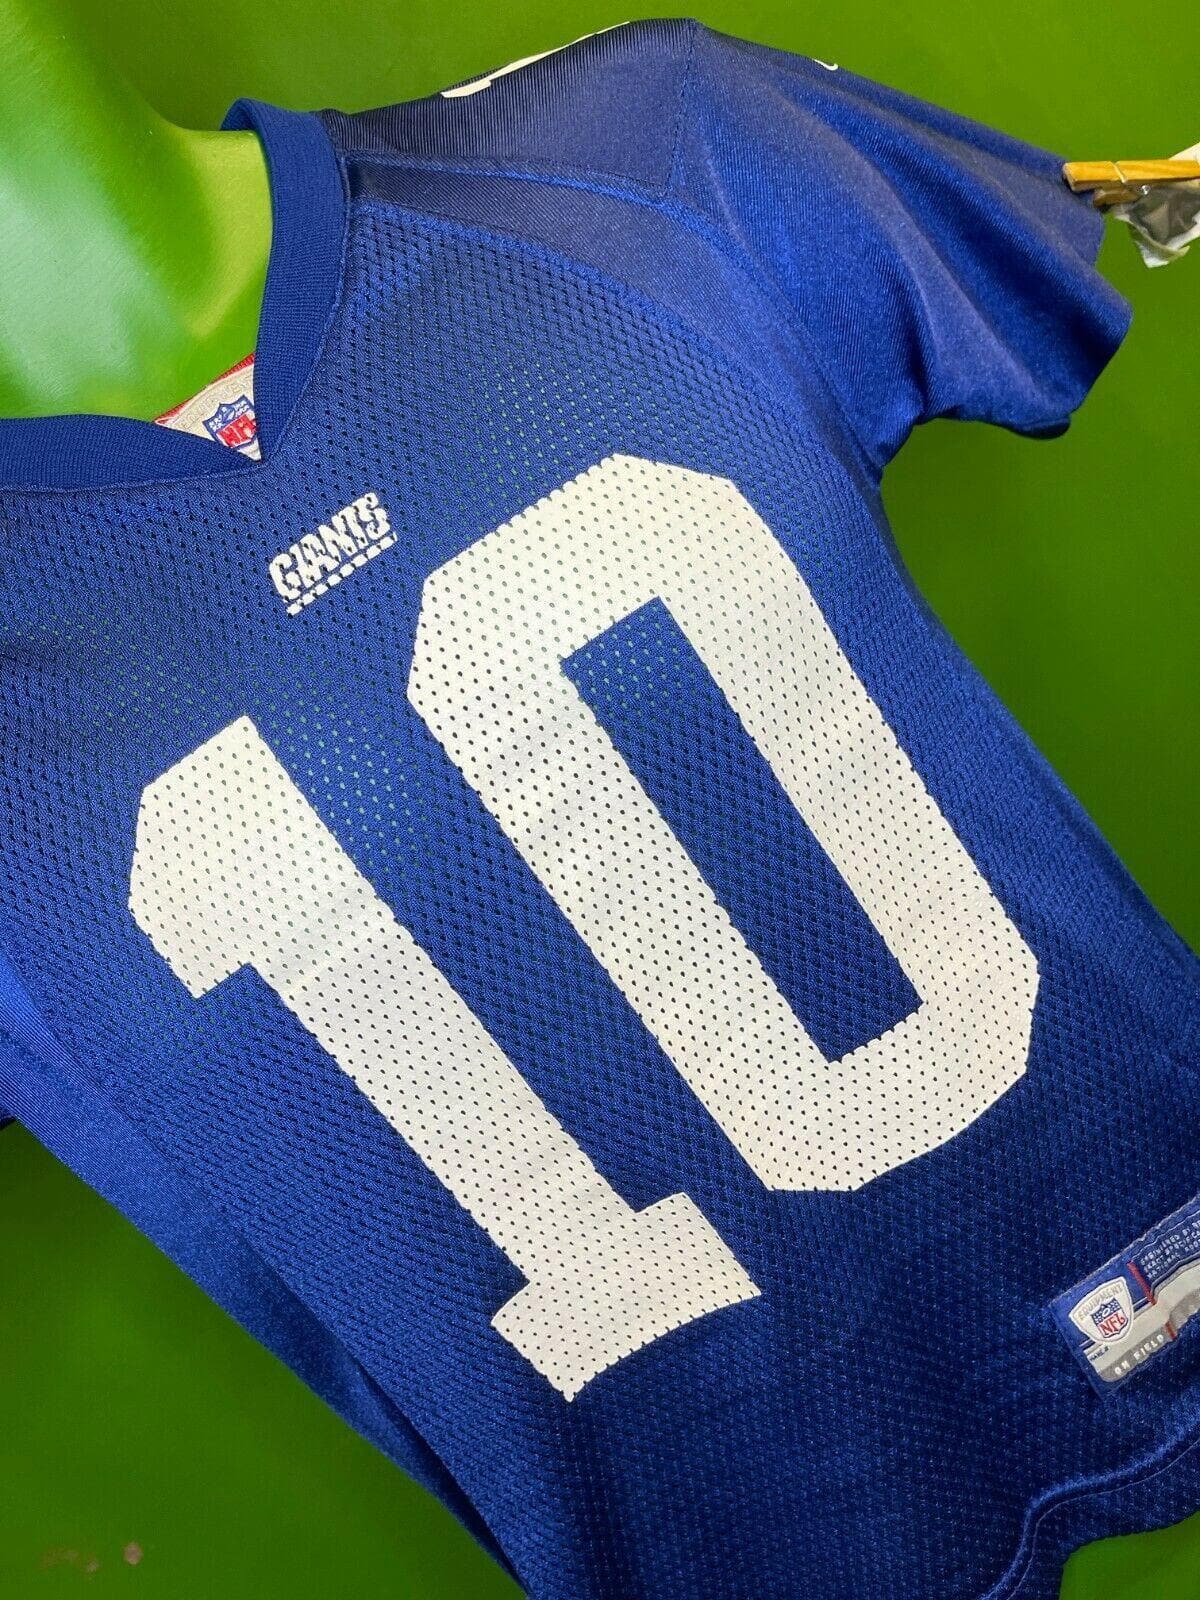 NFL New York Giants Eli Manning #10 Reebok Jersey Youth Small 8